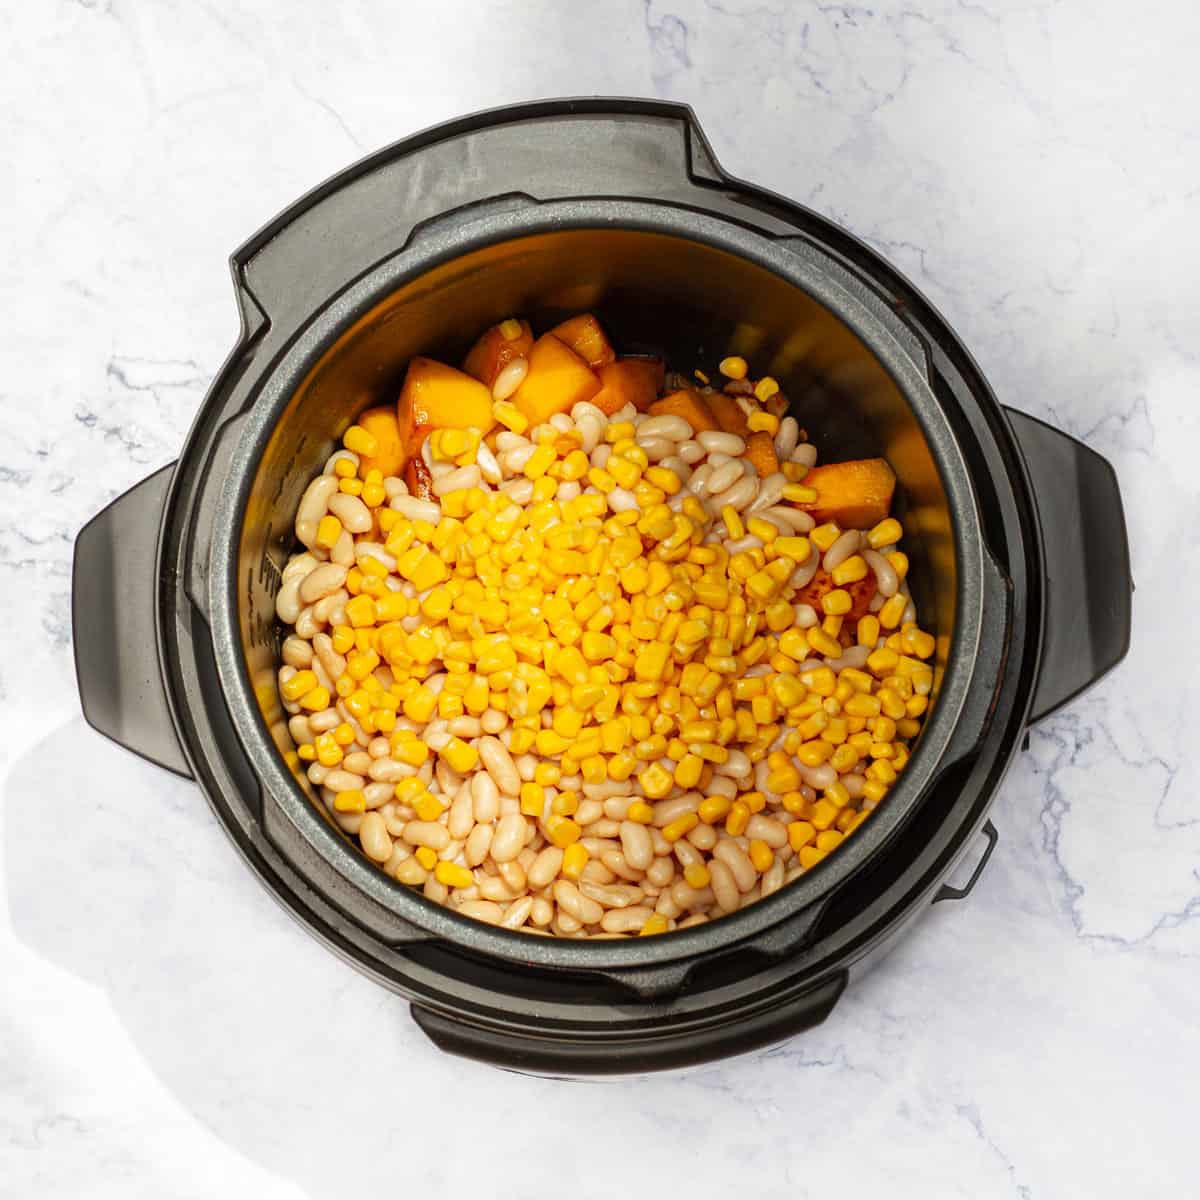 Add the cooked navy beans, corn kernels, diced pumpkin to the pot